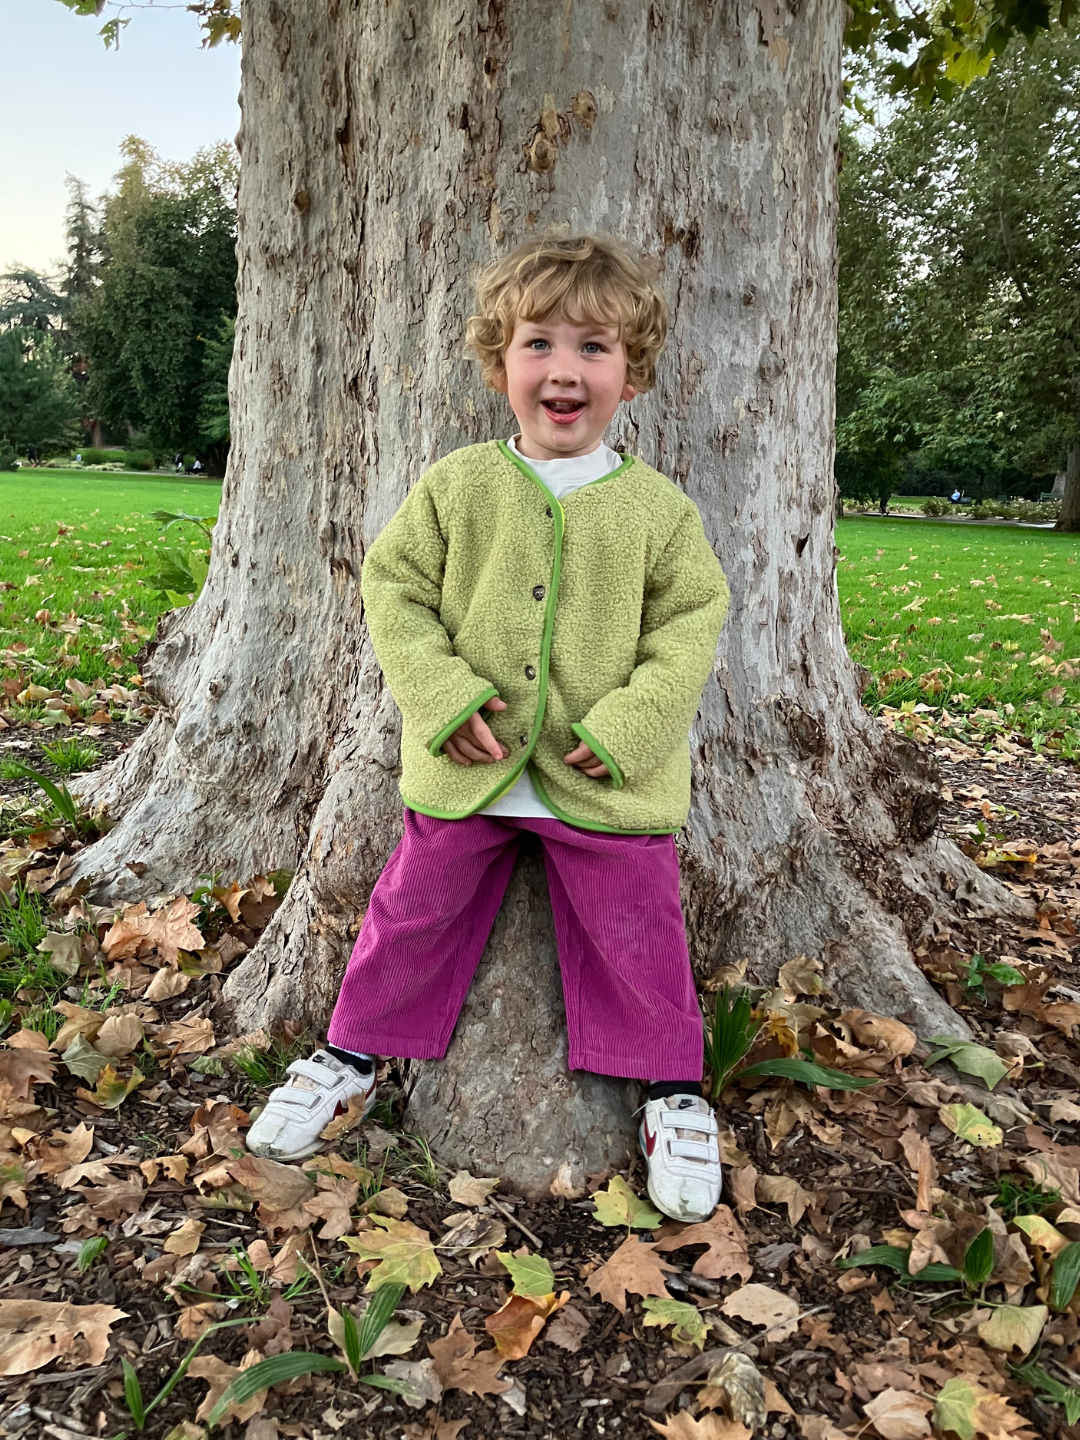 Child in a park leaning on a tree trunk wearing magenta corduroy pants and a green fleece jacket with white velcro sneakers.